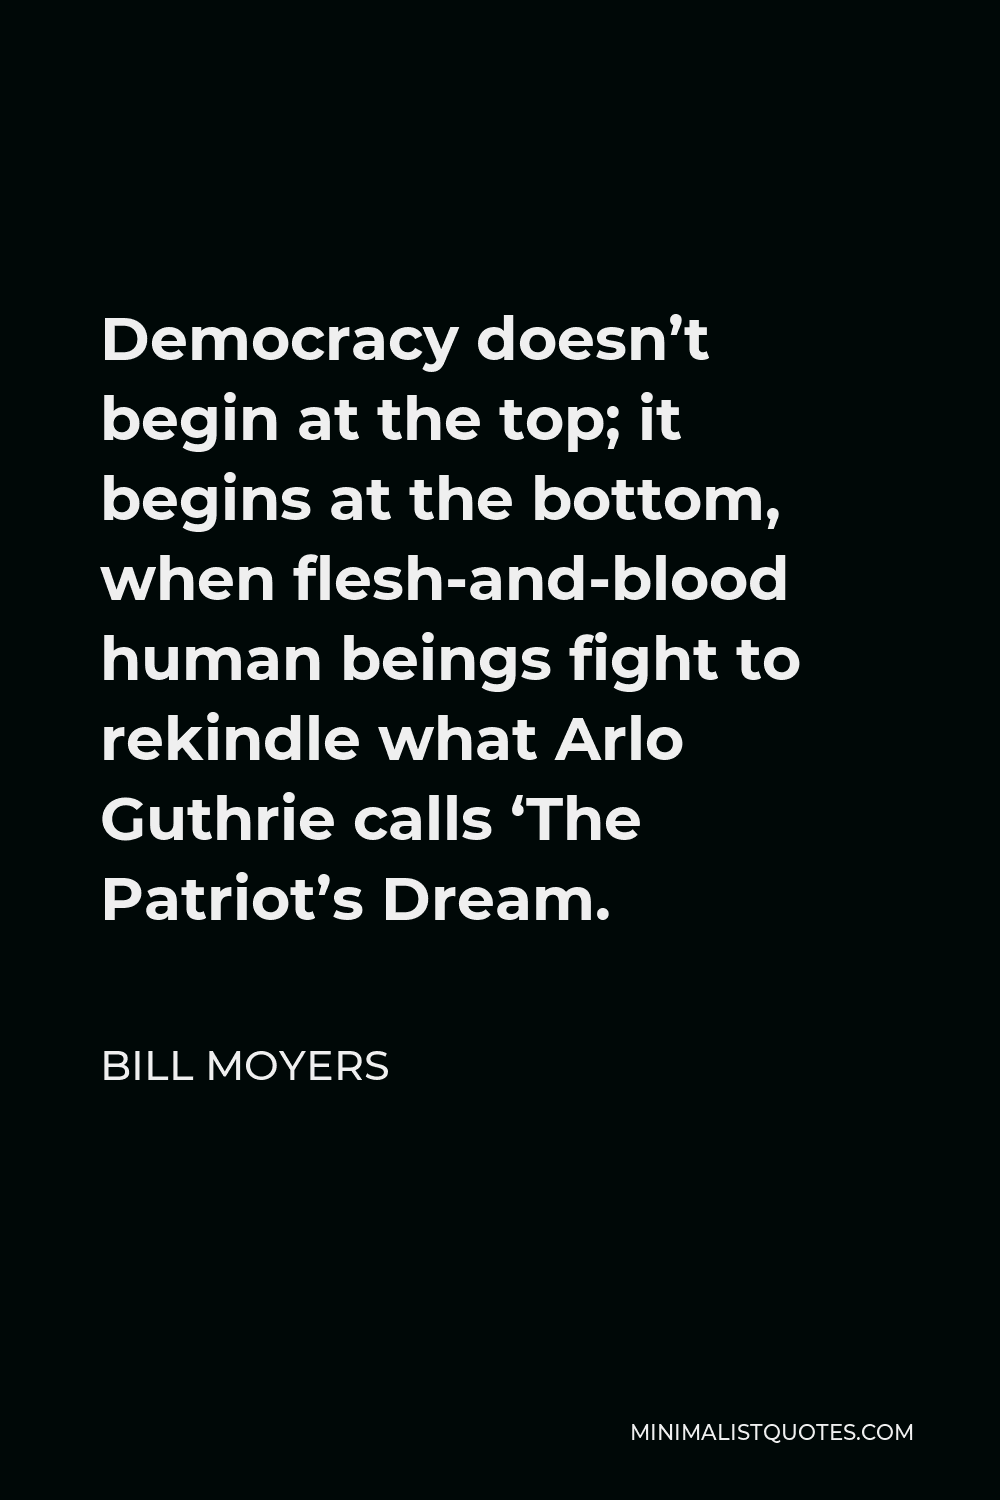 Bill Moyers Quote - Democracy doesn’t begin at the top; it begins at the bottom, when flesh-and-blood human beings fight to rekindle what Arlo Guthrie calls ‘The Patriot’s Dream.